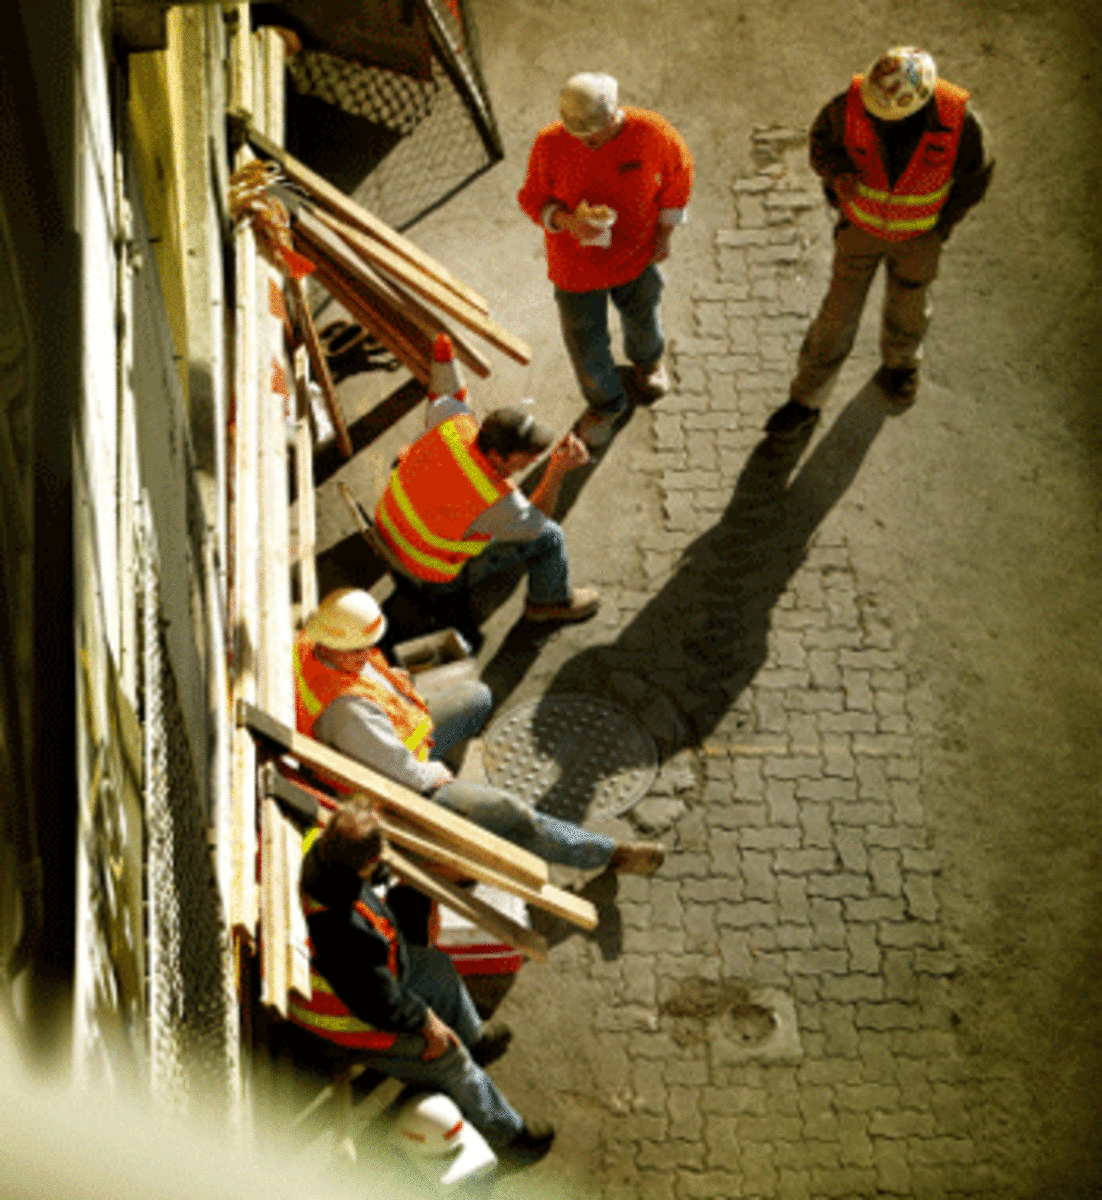 idle construction workers